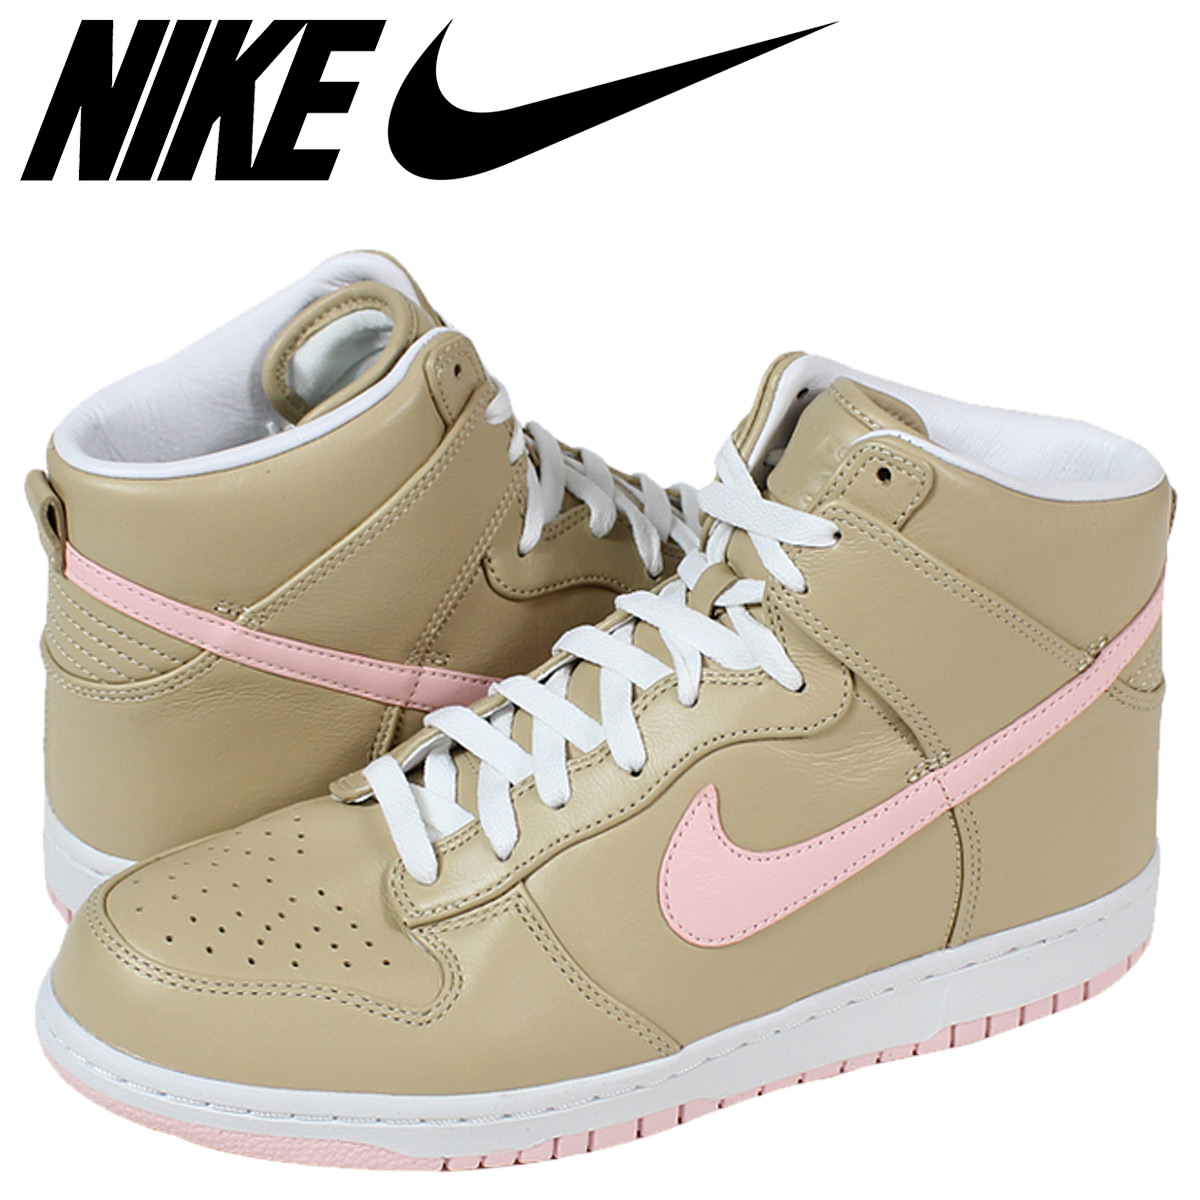 nike dunks when they were still basketball shoes